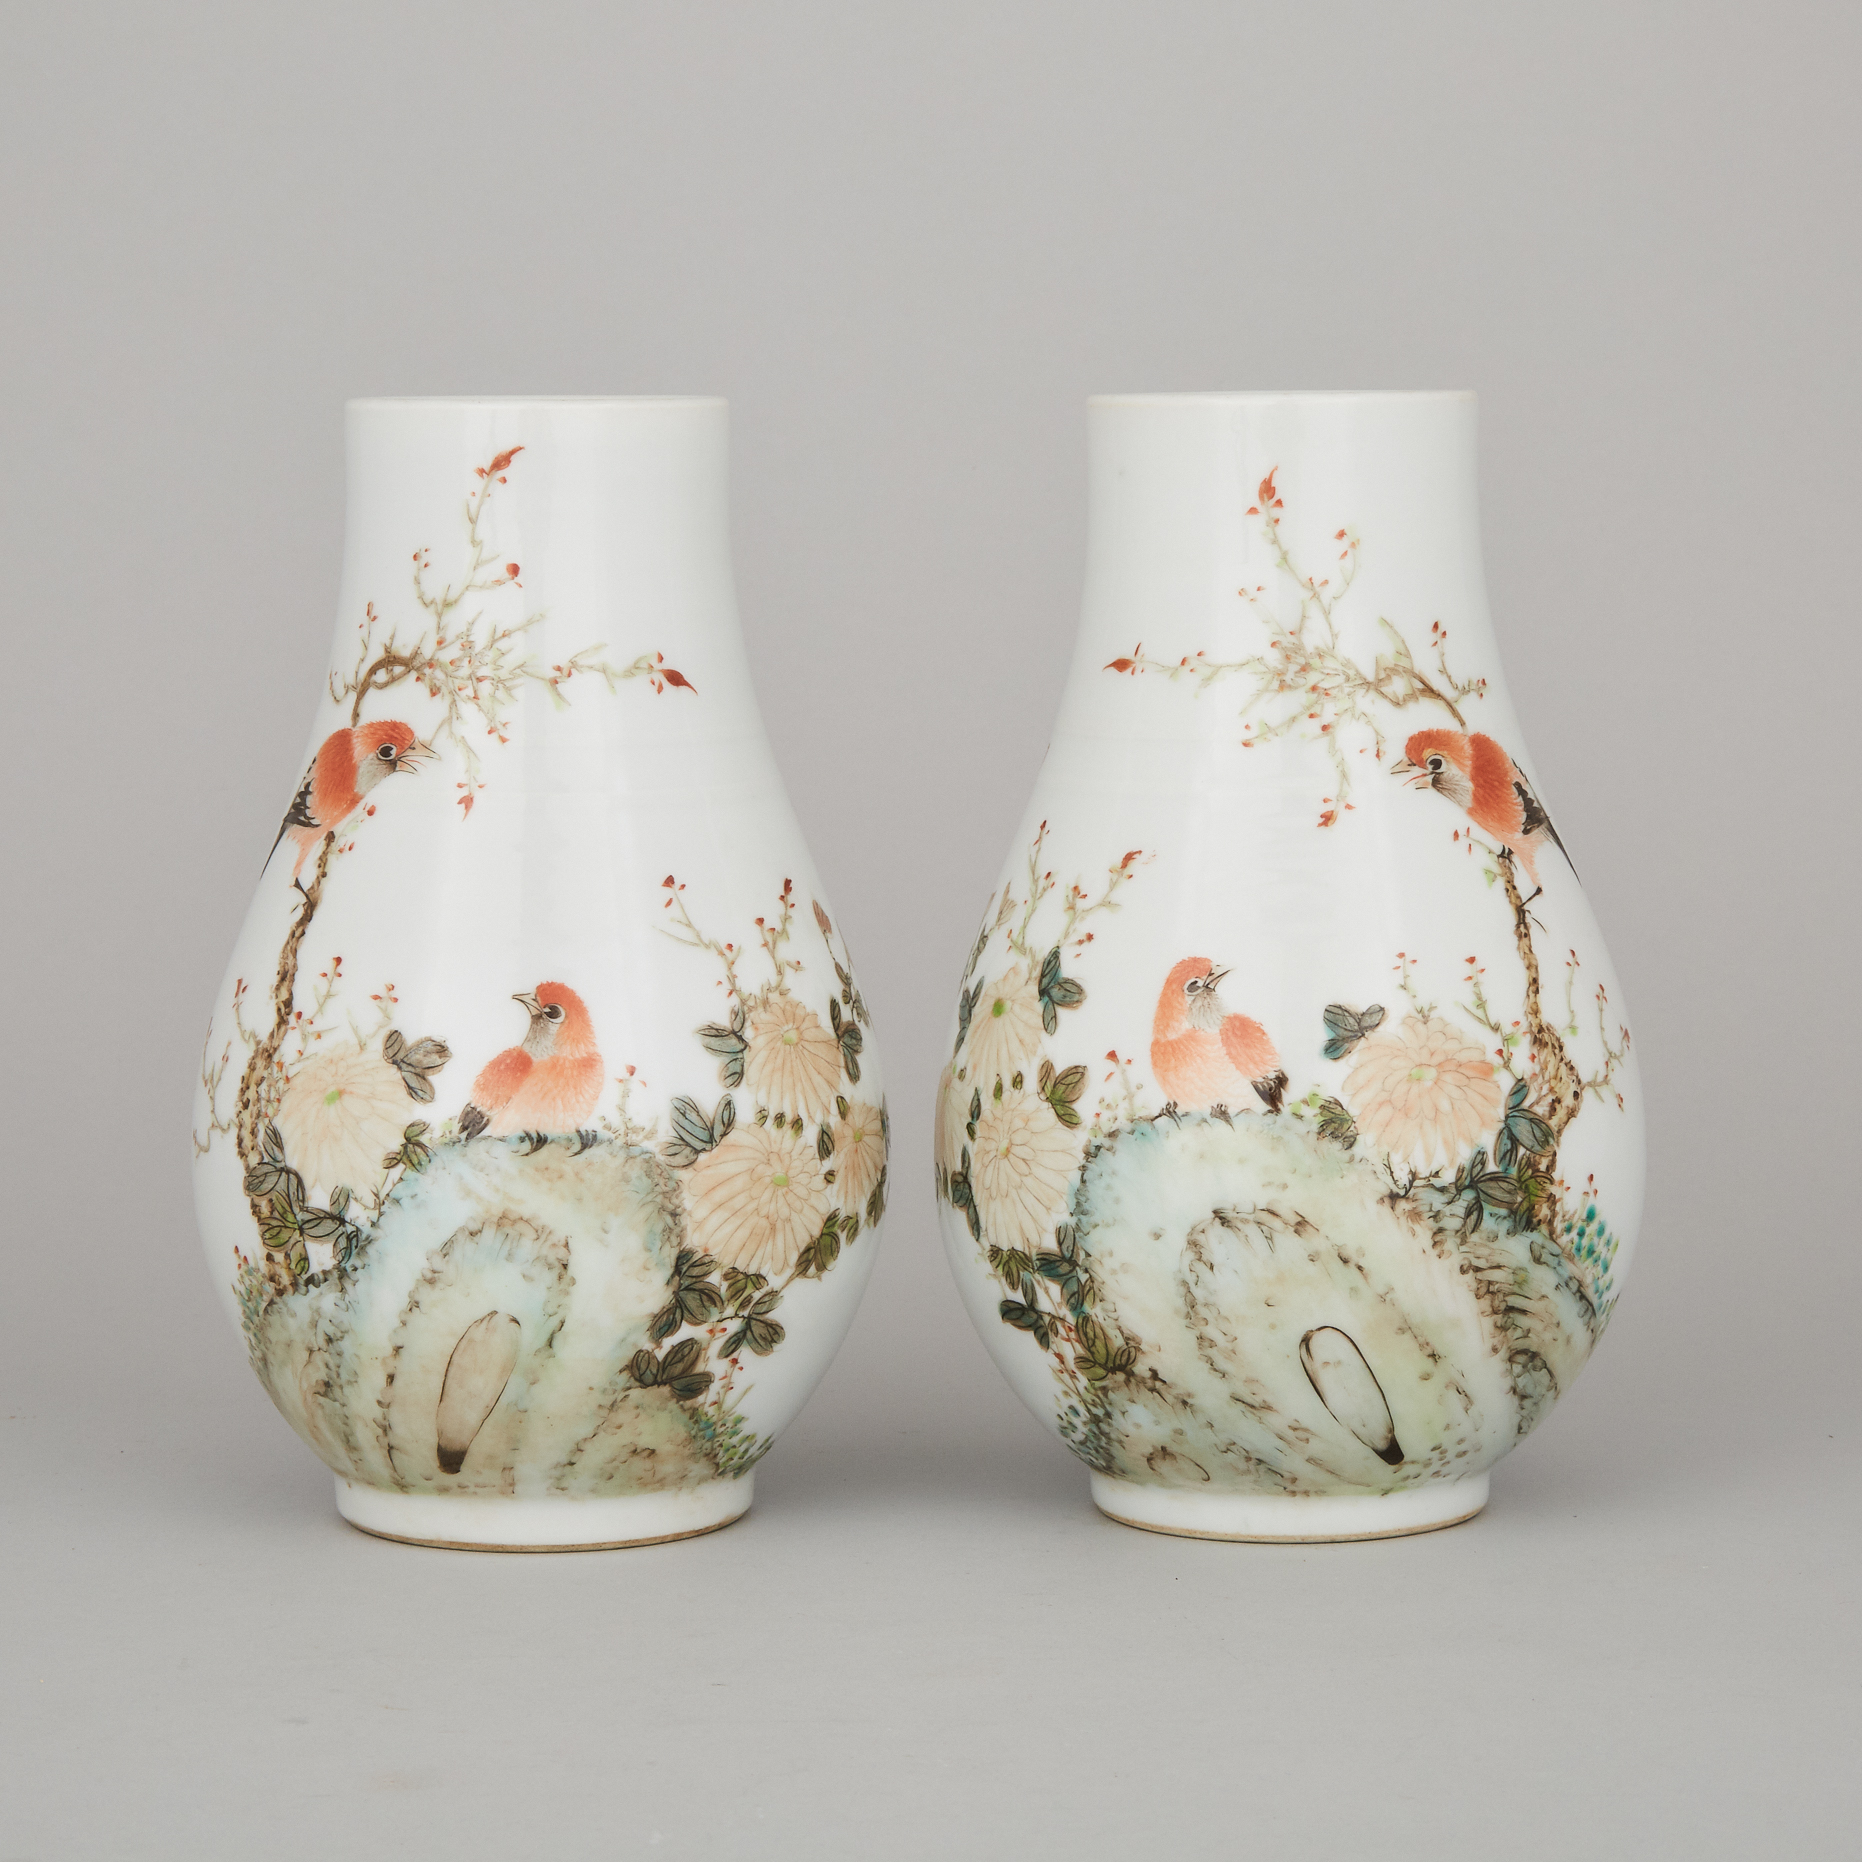 A Pair of Enameled 'Birds and Calligraphy' Vases, Signed Xu Dasheng (1937-?)